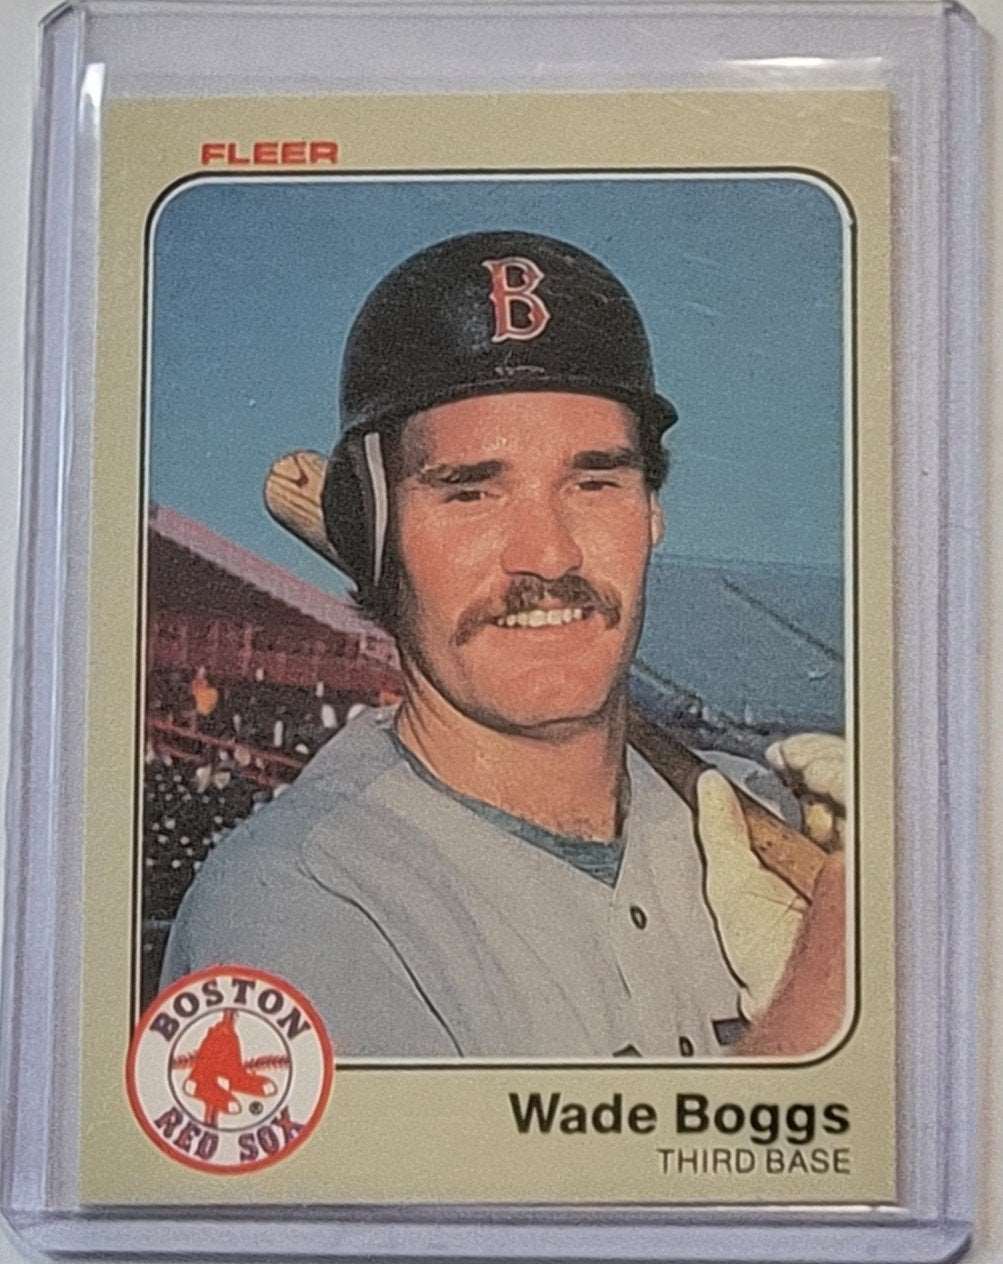 1983 Fleer Wade Boggs Baseball Trading Card TPTV simple Xclusive Collectibles   